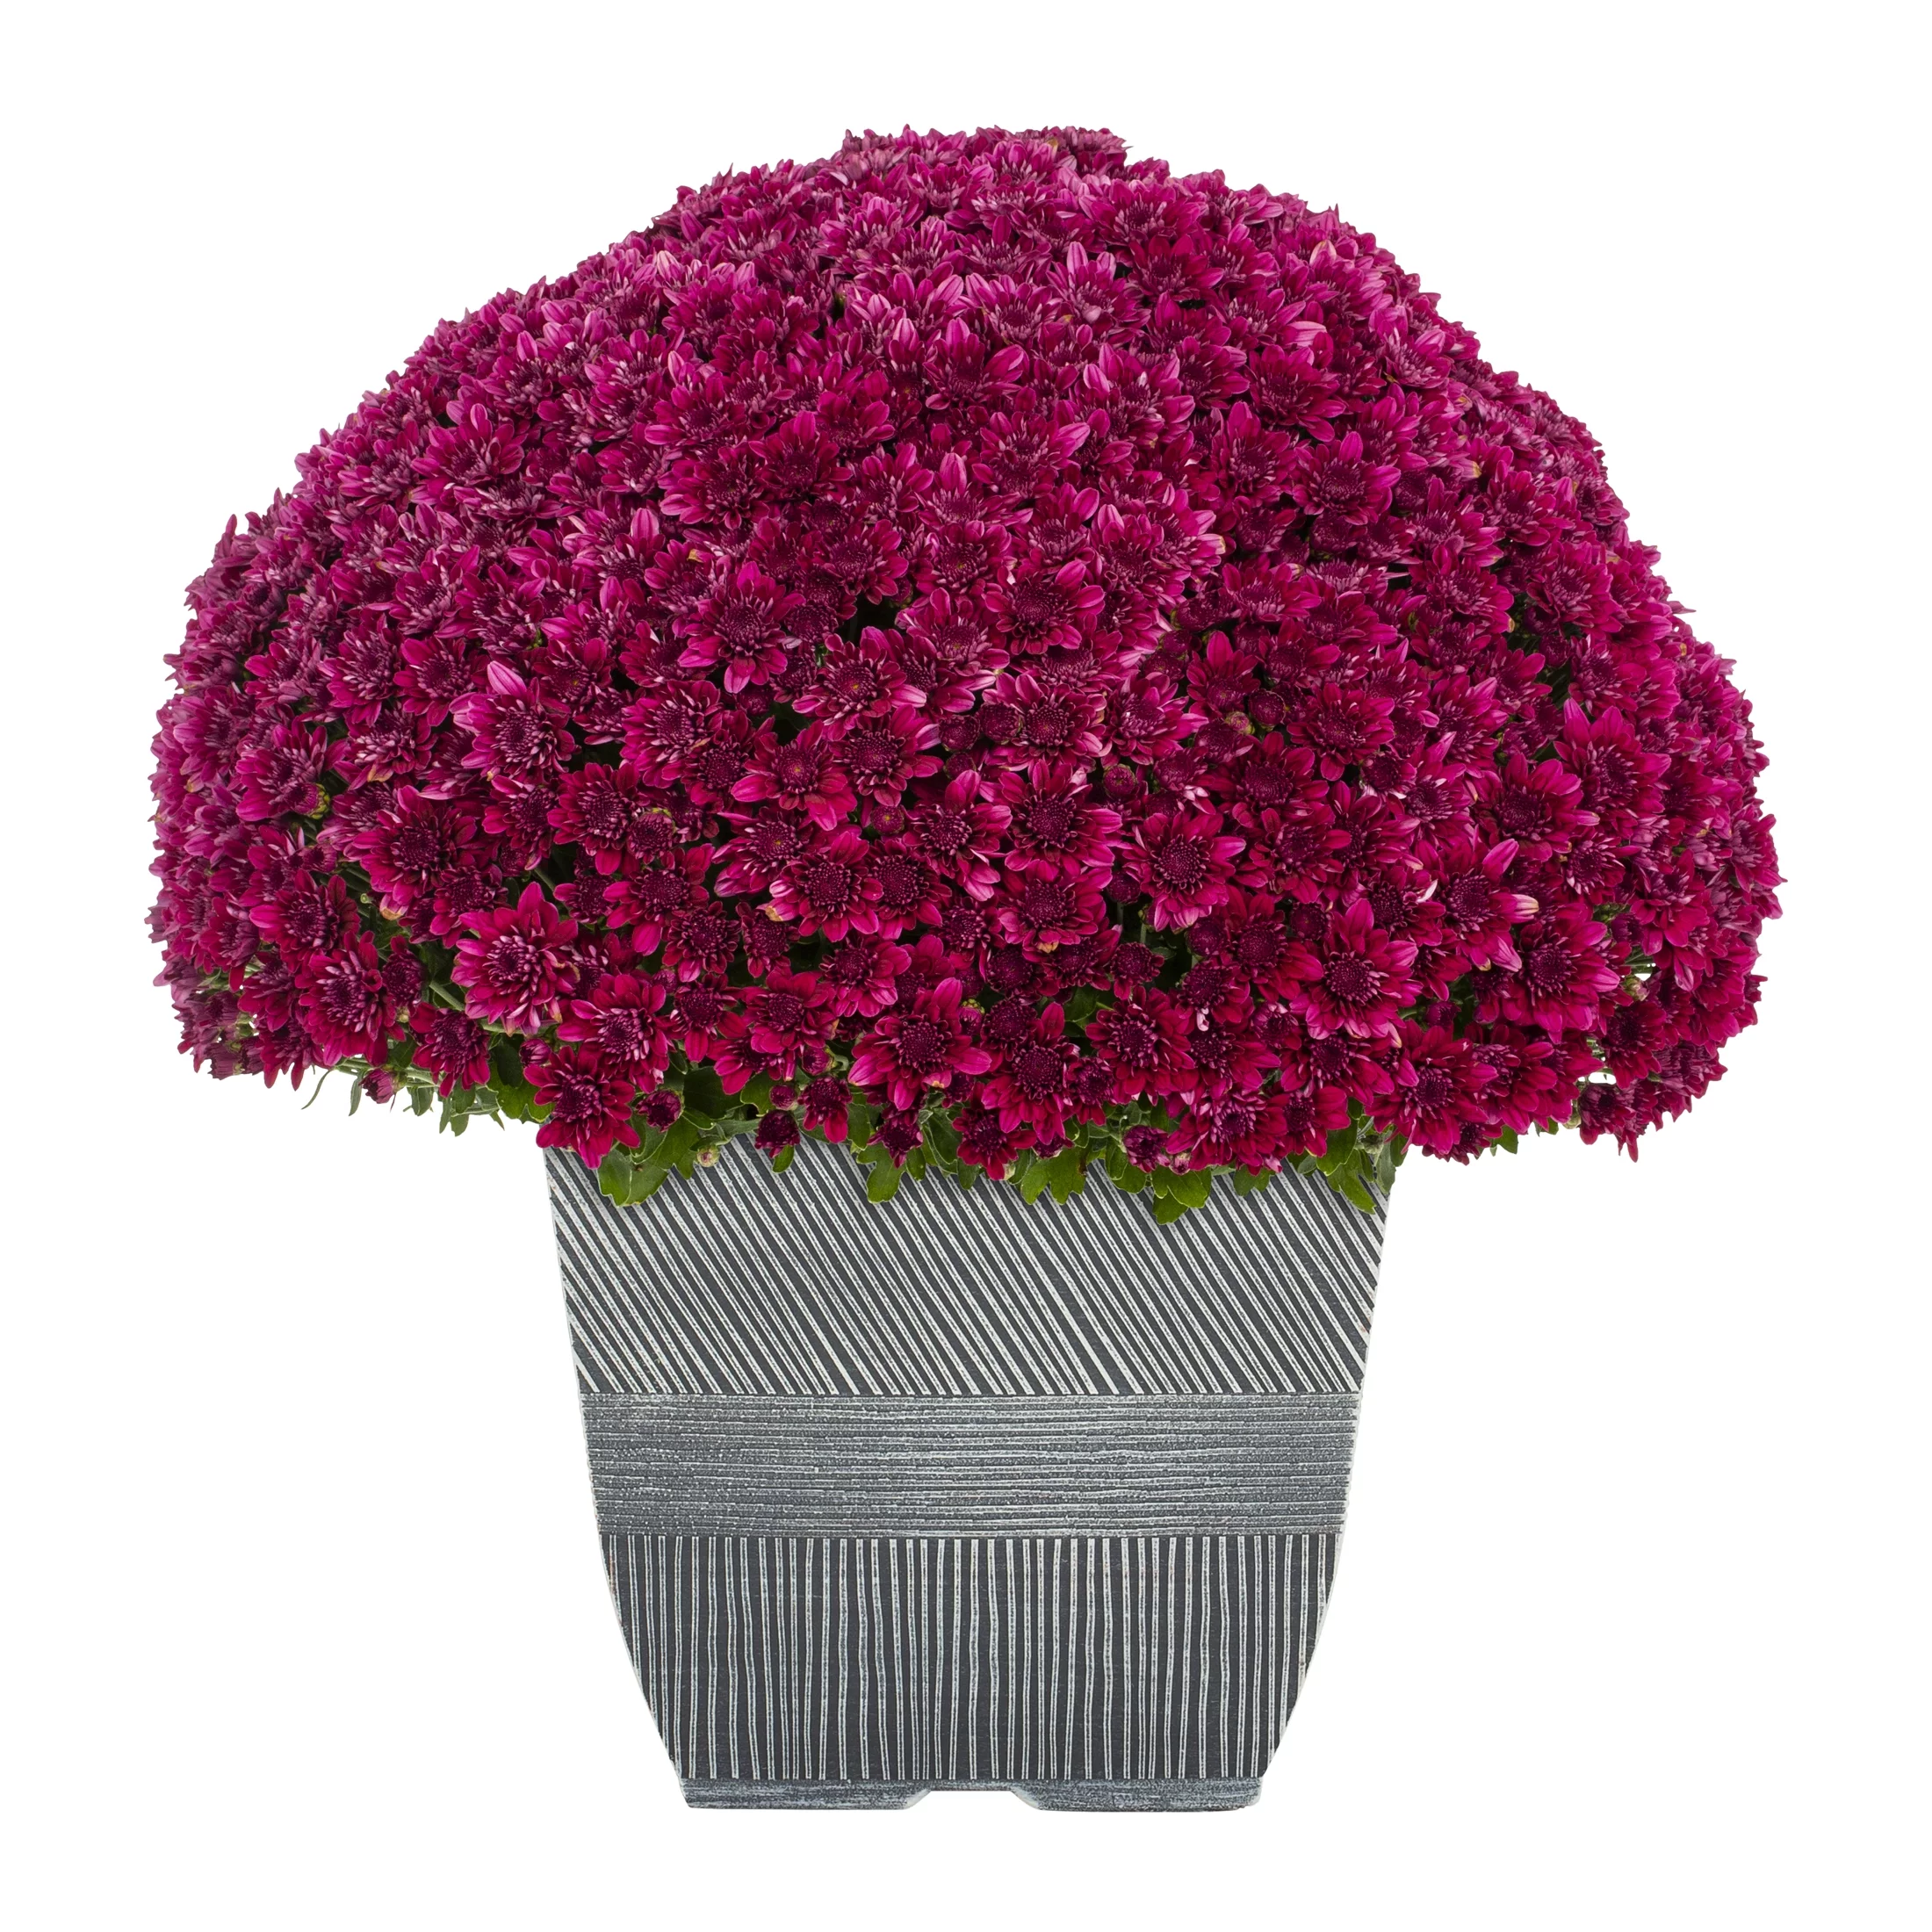 Better Homes & Gardens 1G Purple Mum (1-Pack) Full Sun Live Plant with Square Decorative Planter